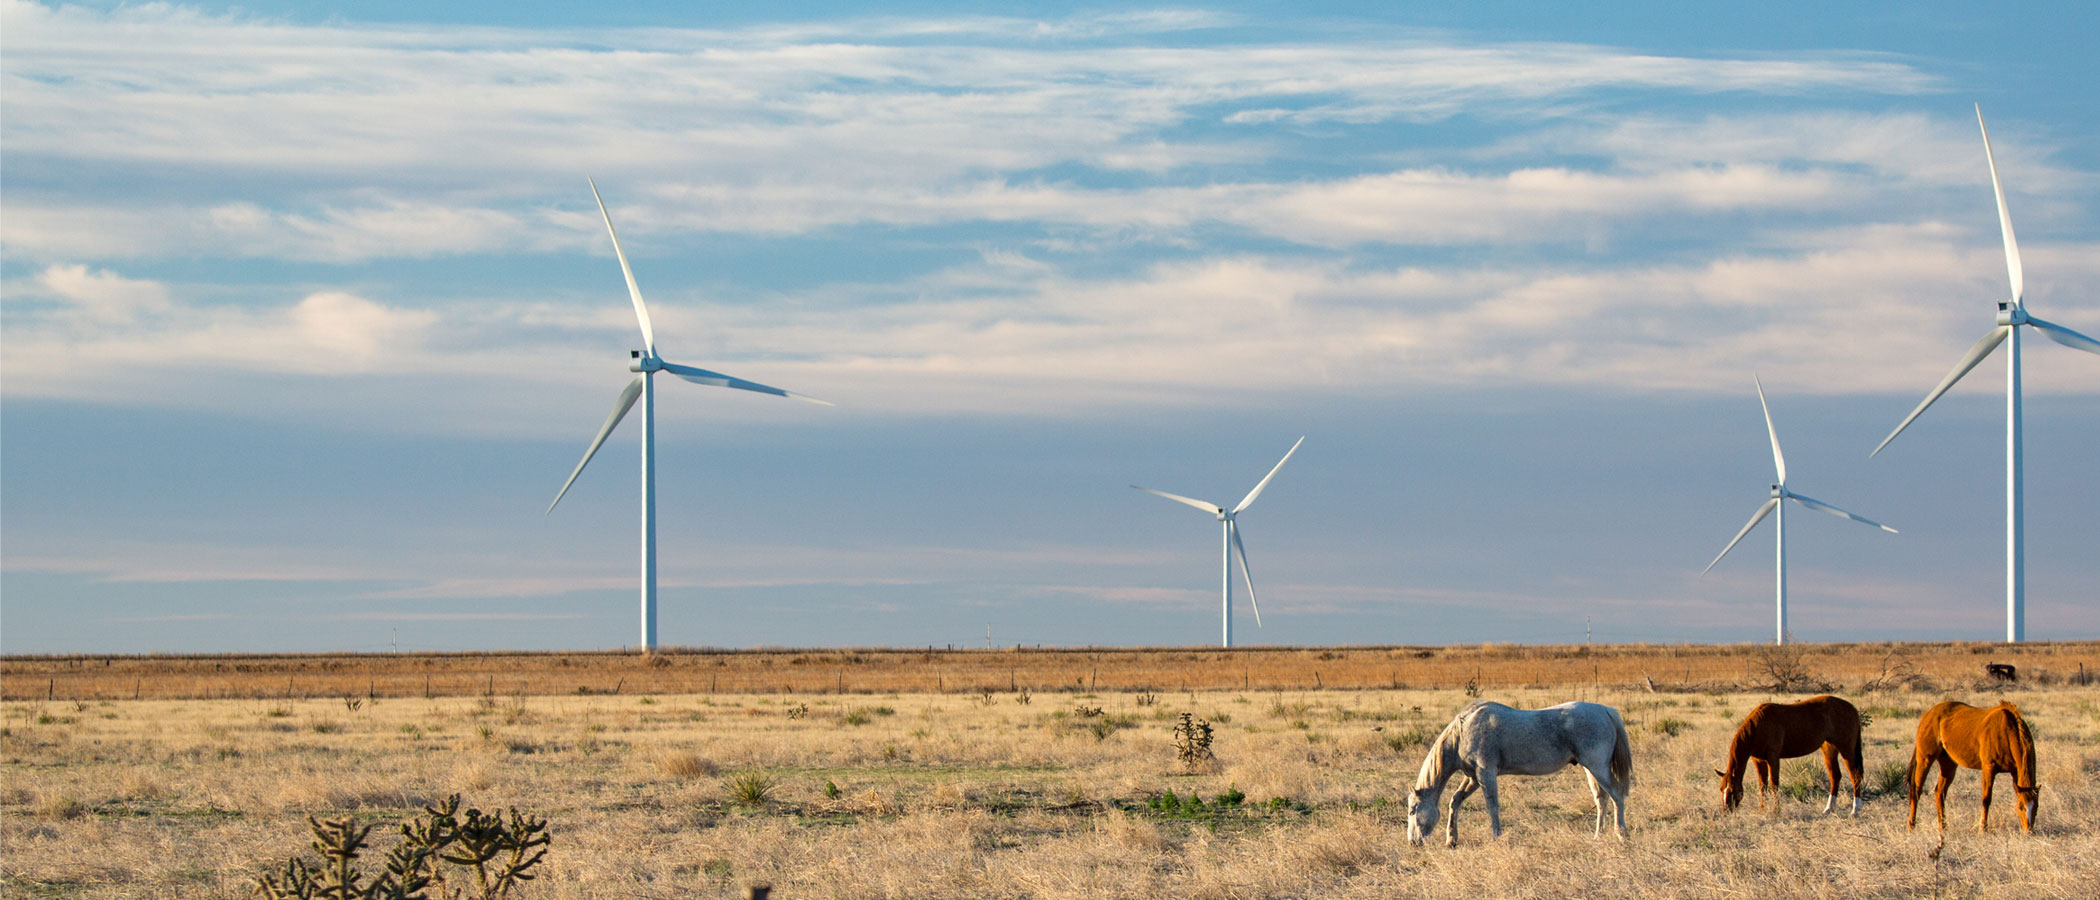 Horses graze in a field with wind turbines in the distance.